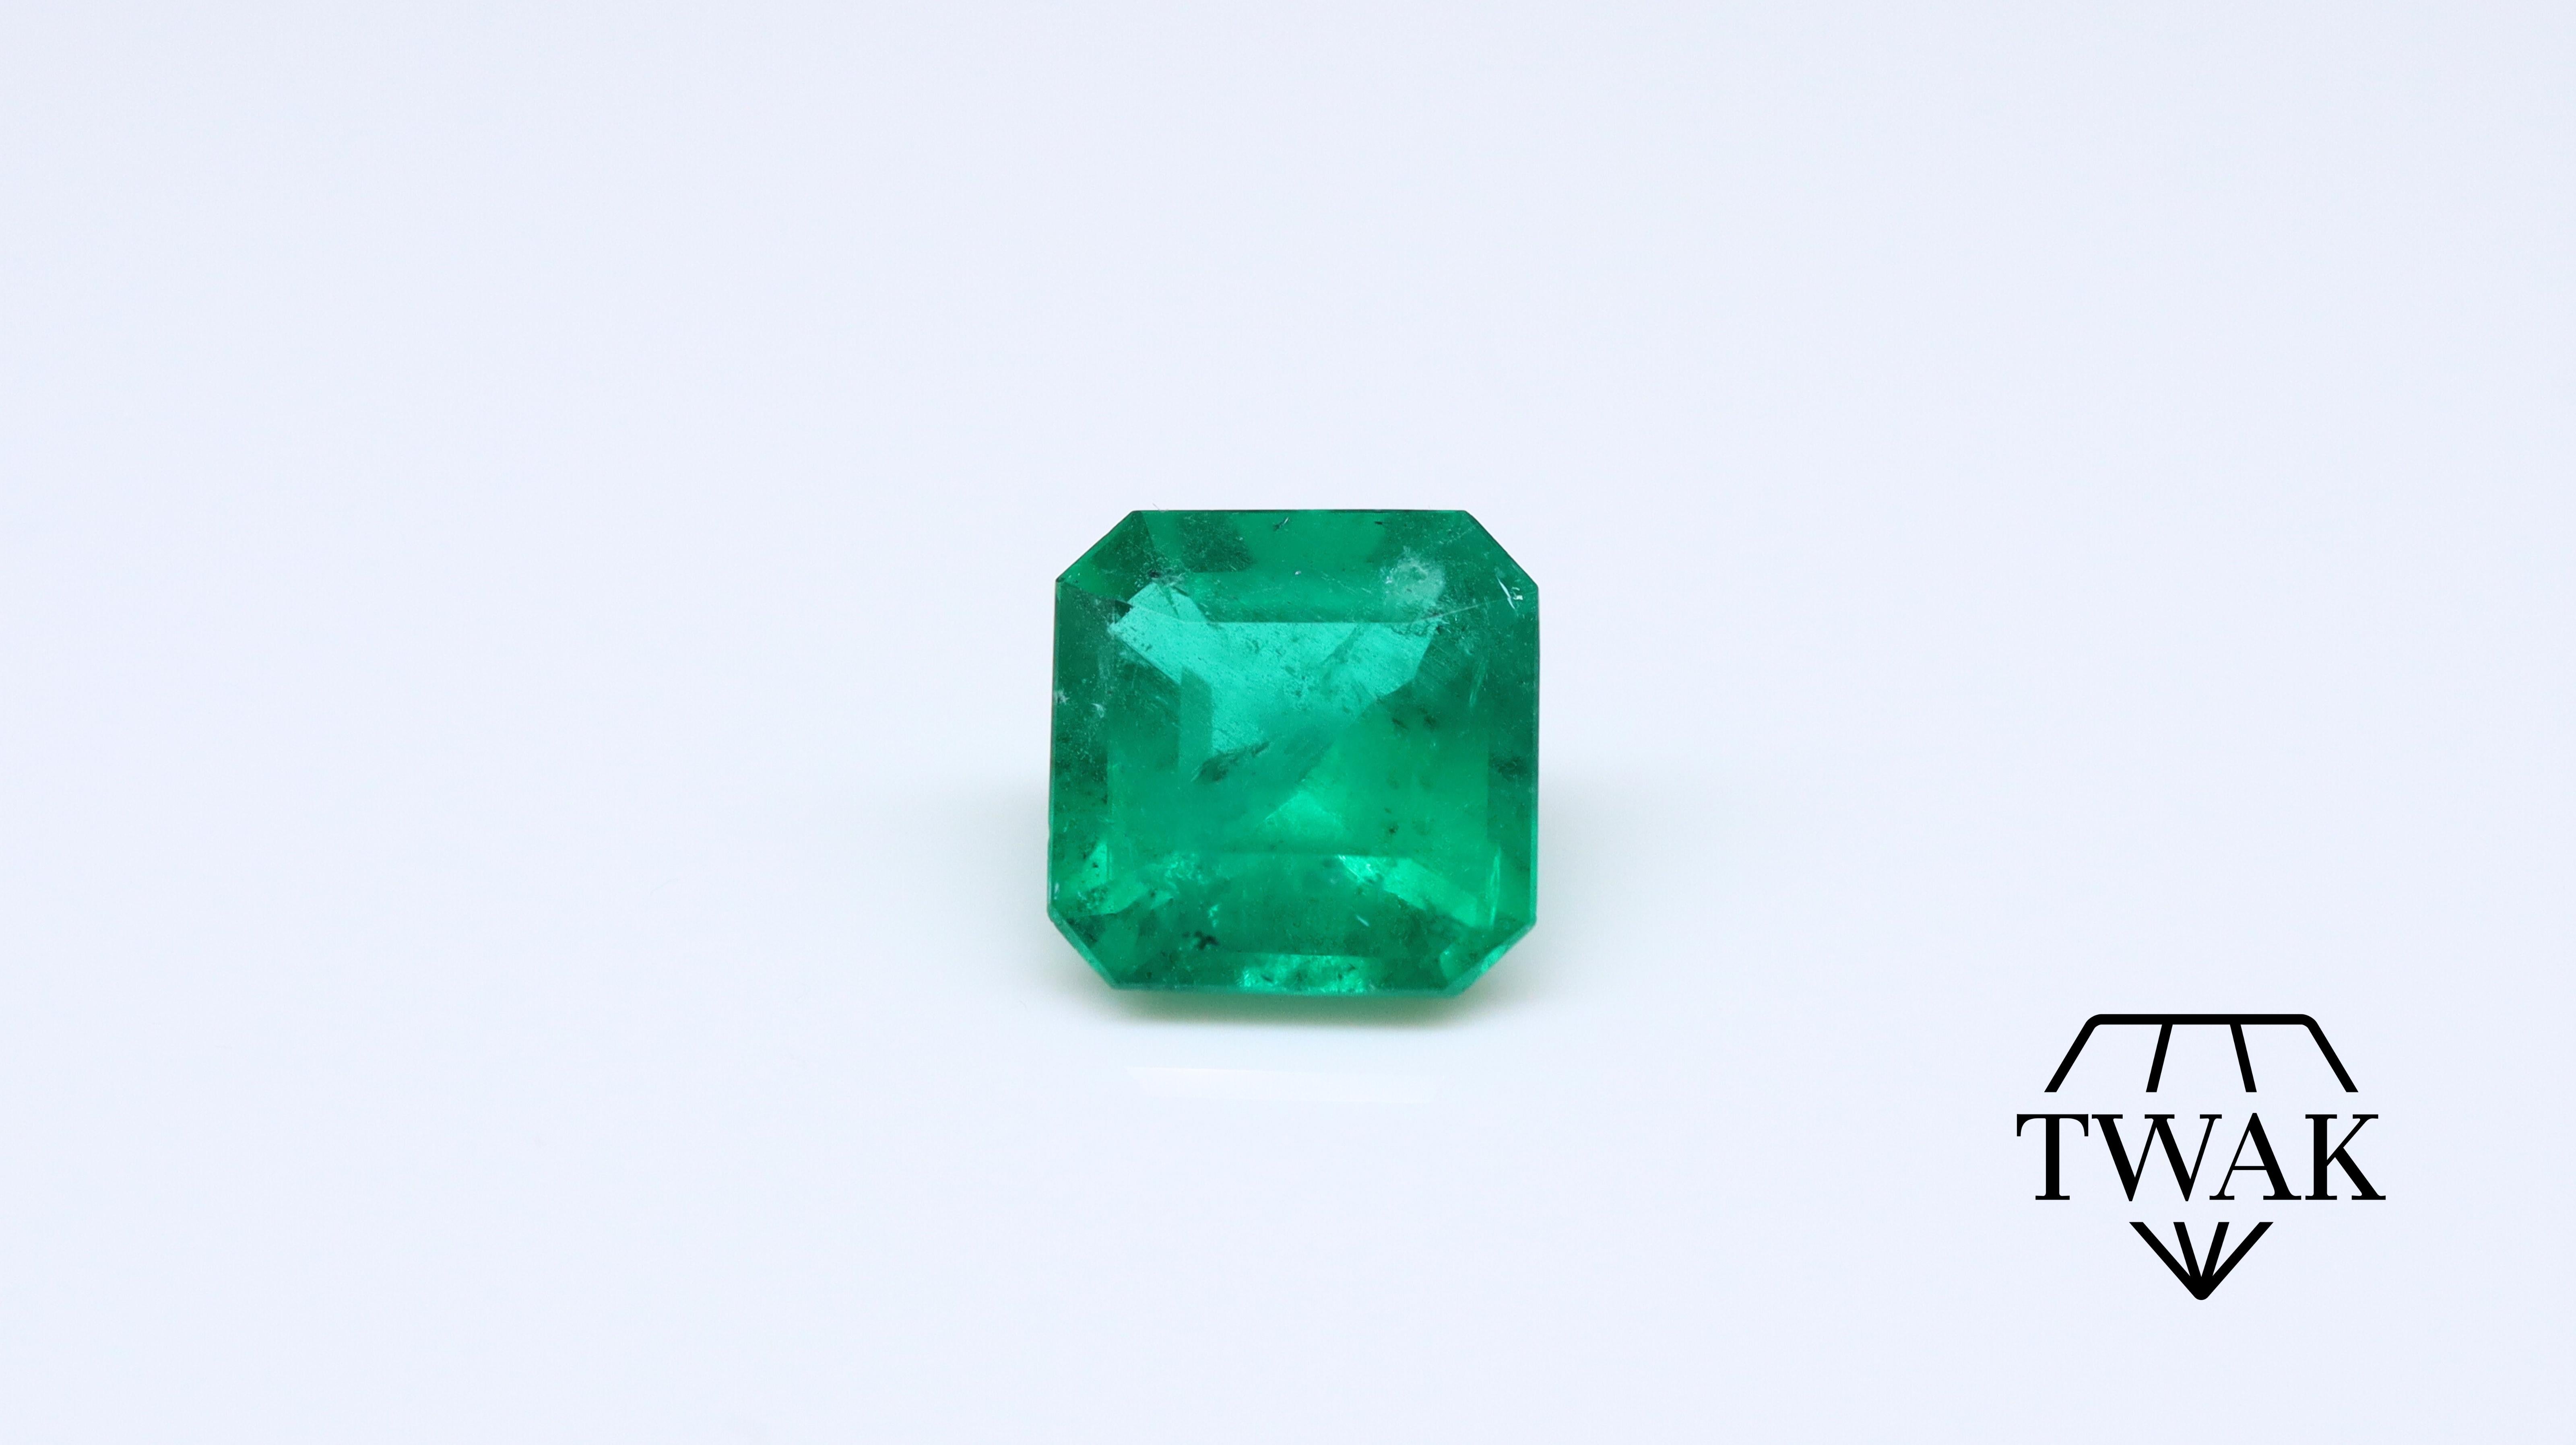 A beautiful Emerald with excellent color, crystal, and saturation.

Details and description:
Dimensions: 8.41 x 8.55 x 5.40mm
Weight: 2.41ct
Color: Vivid/Deep Green 
Treatment: Opticom

Emeralds are naturally porous and inclusive stones, with